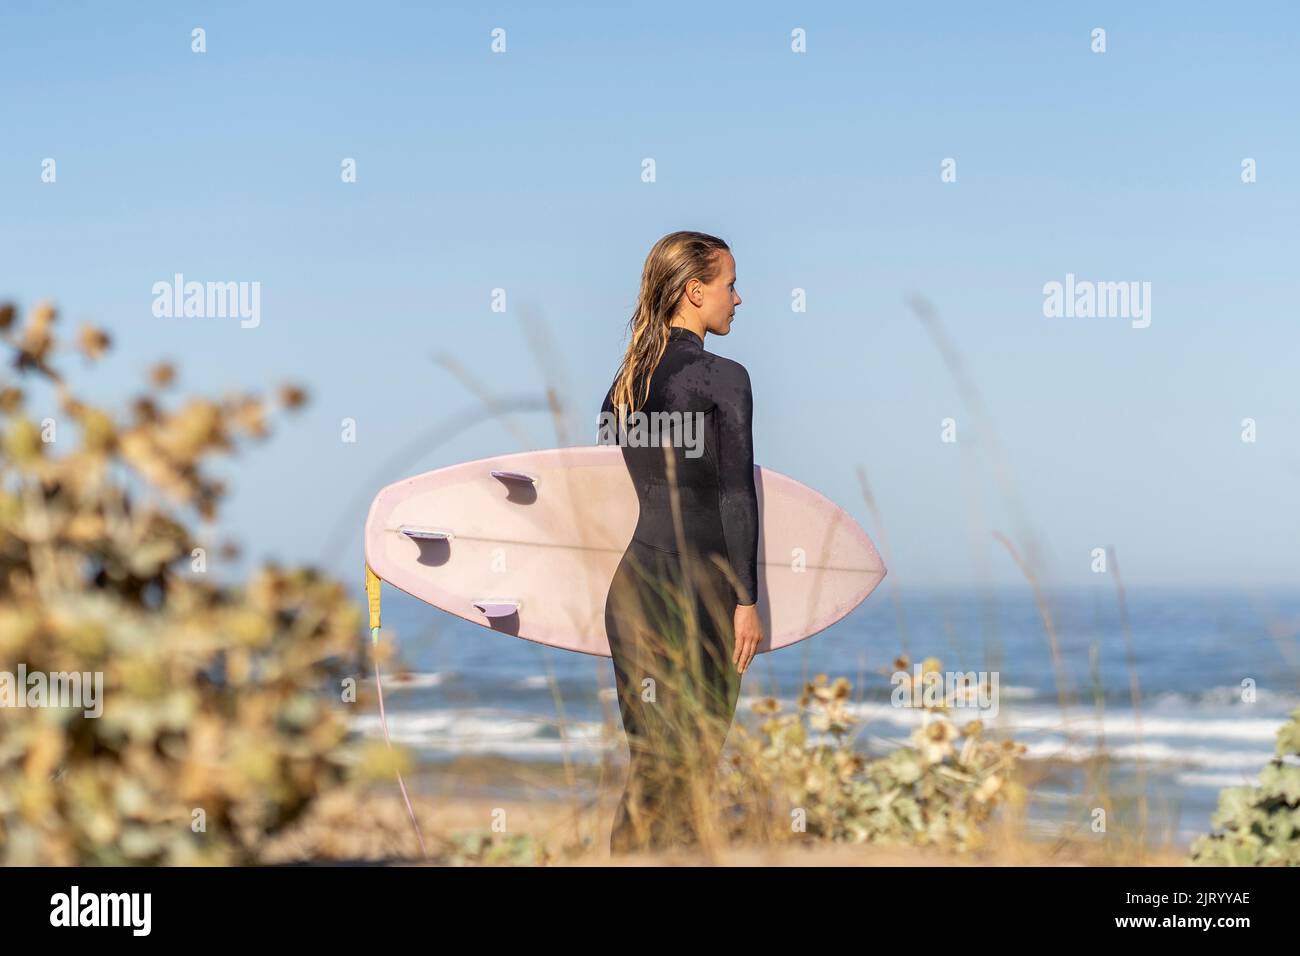 Female surfer girl at the beach with her surfboard looking at the waves in the morning. Stock Photo